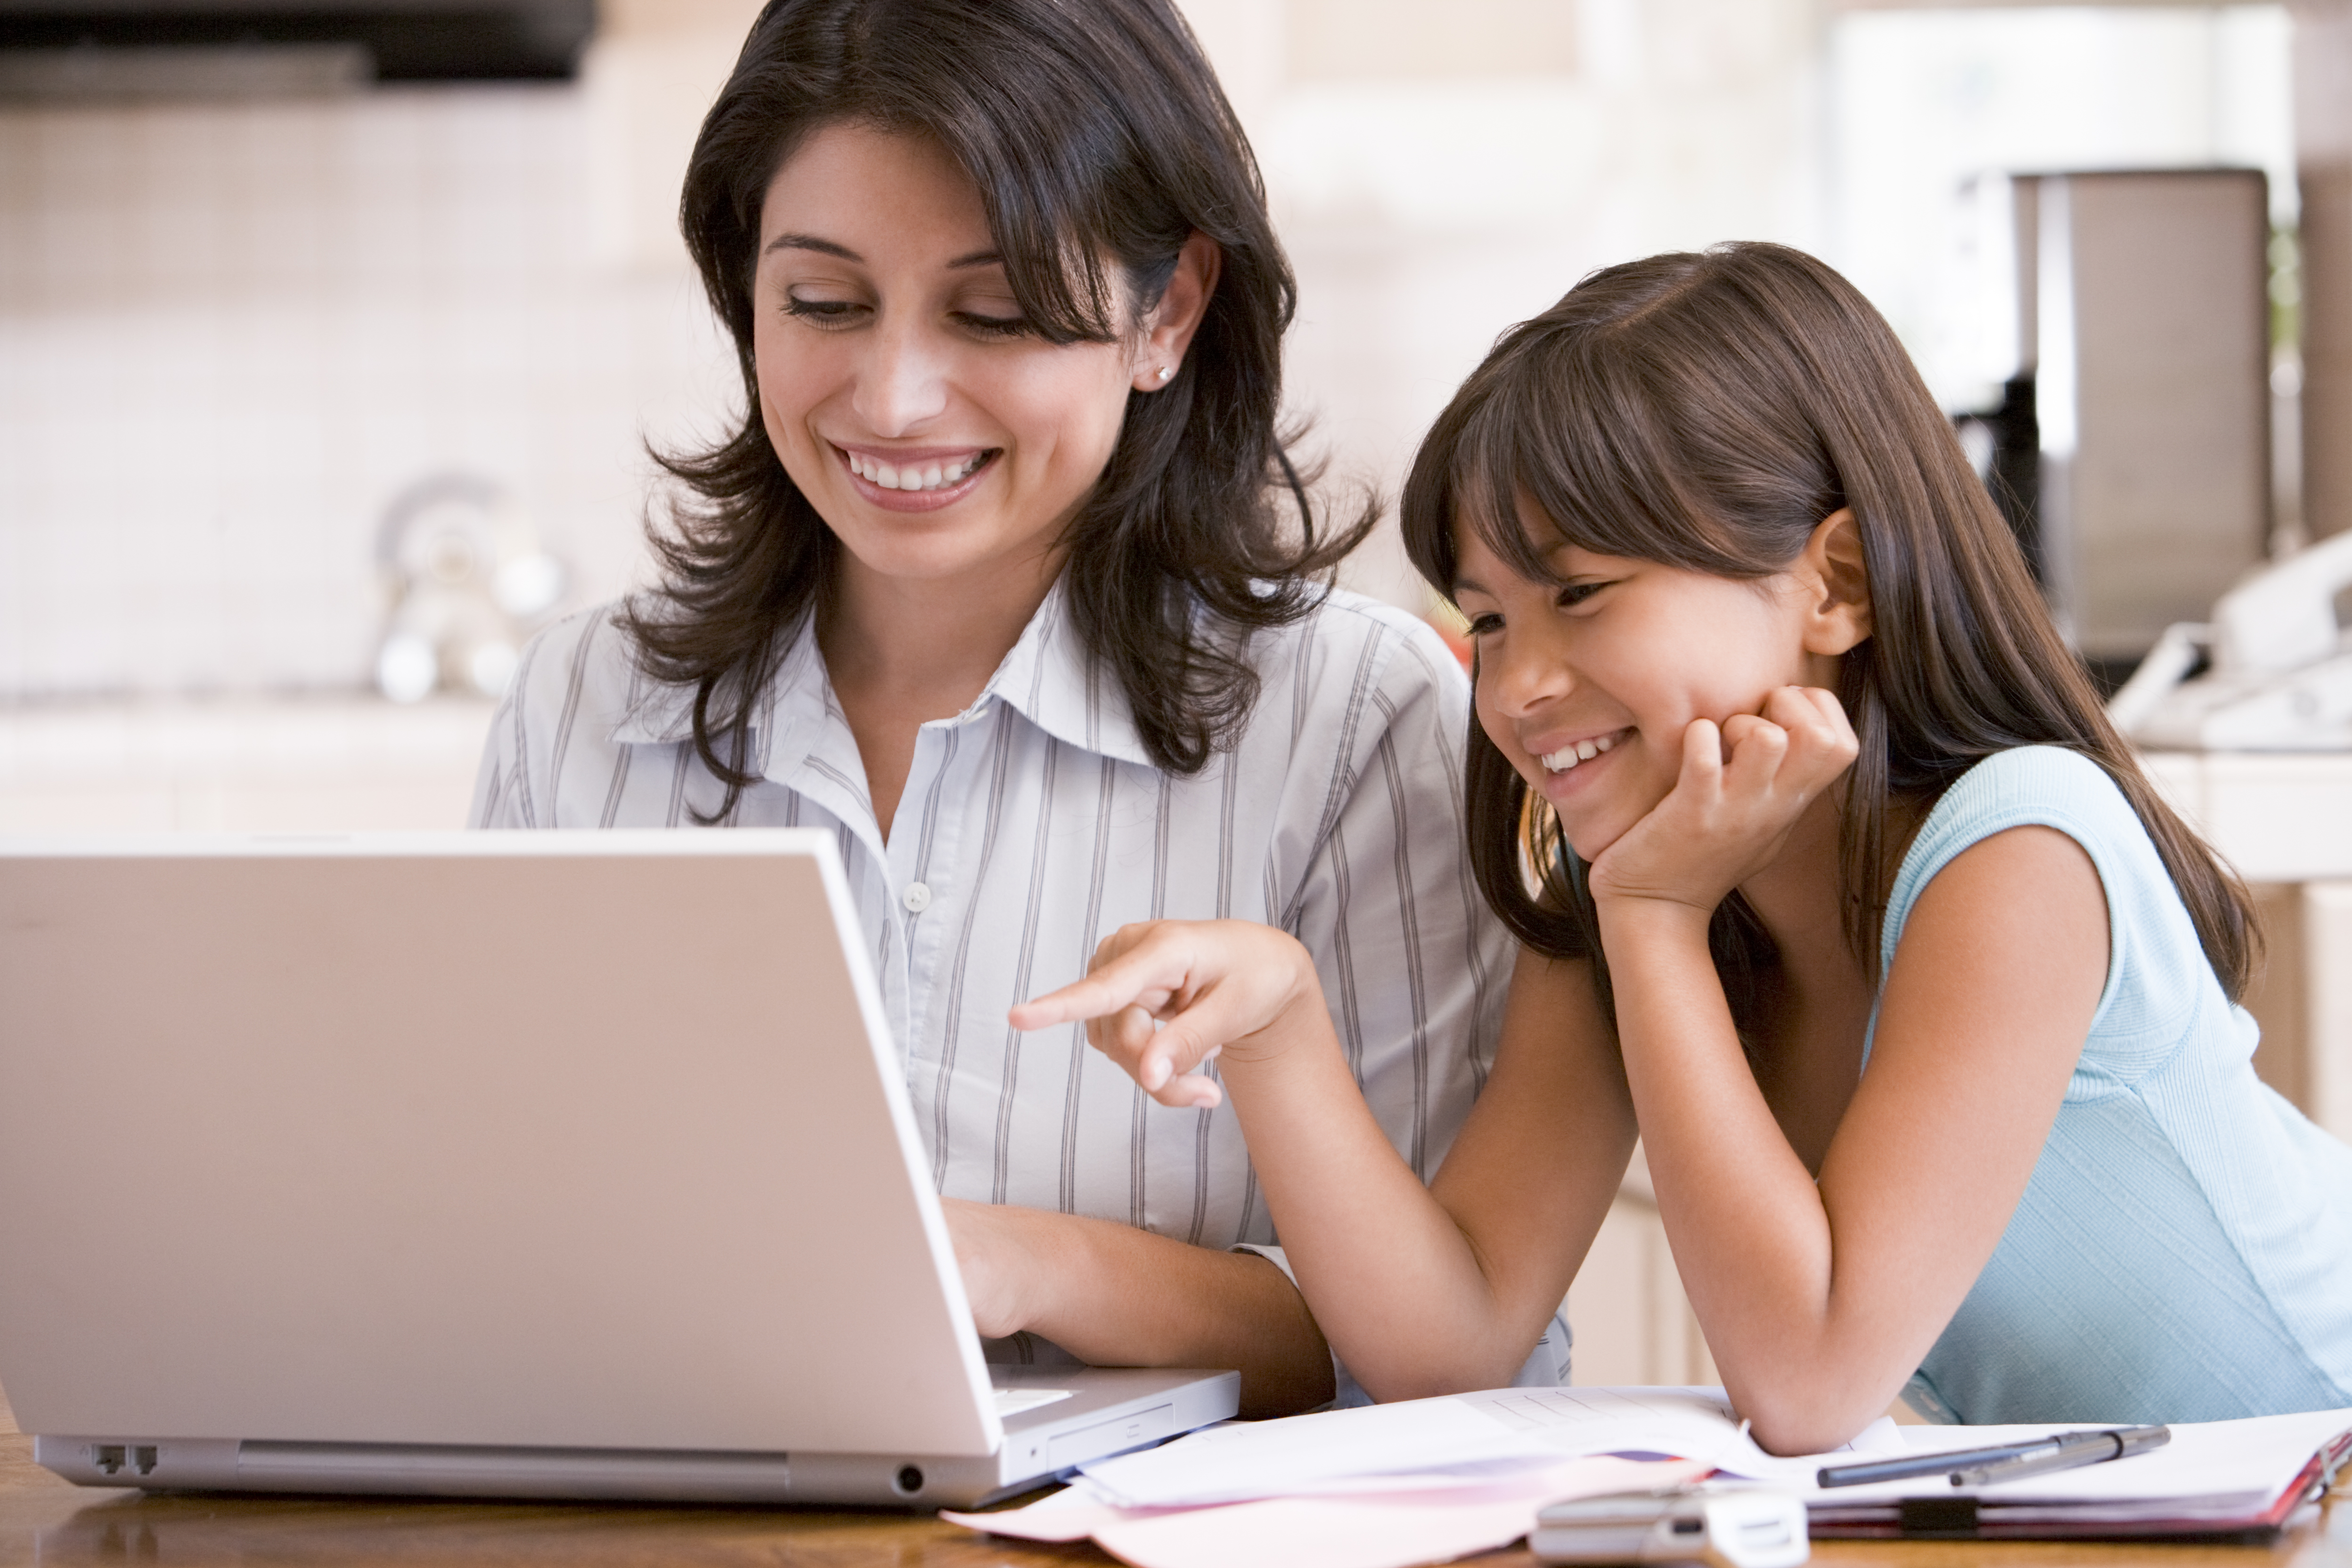 Woman and young girl in kitchen with laptop